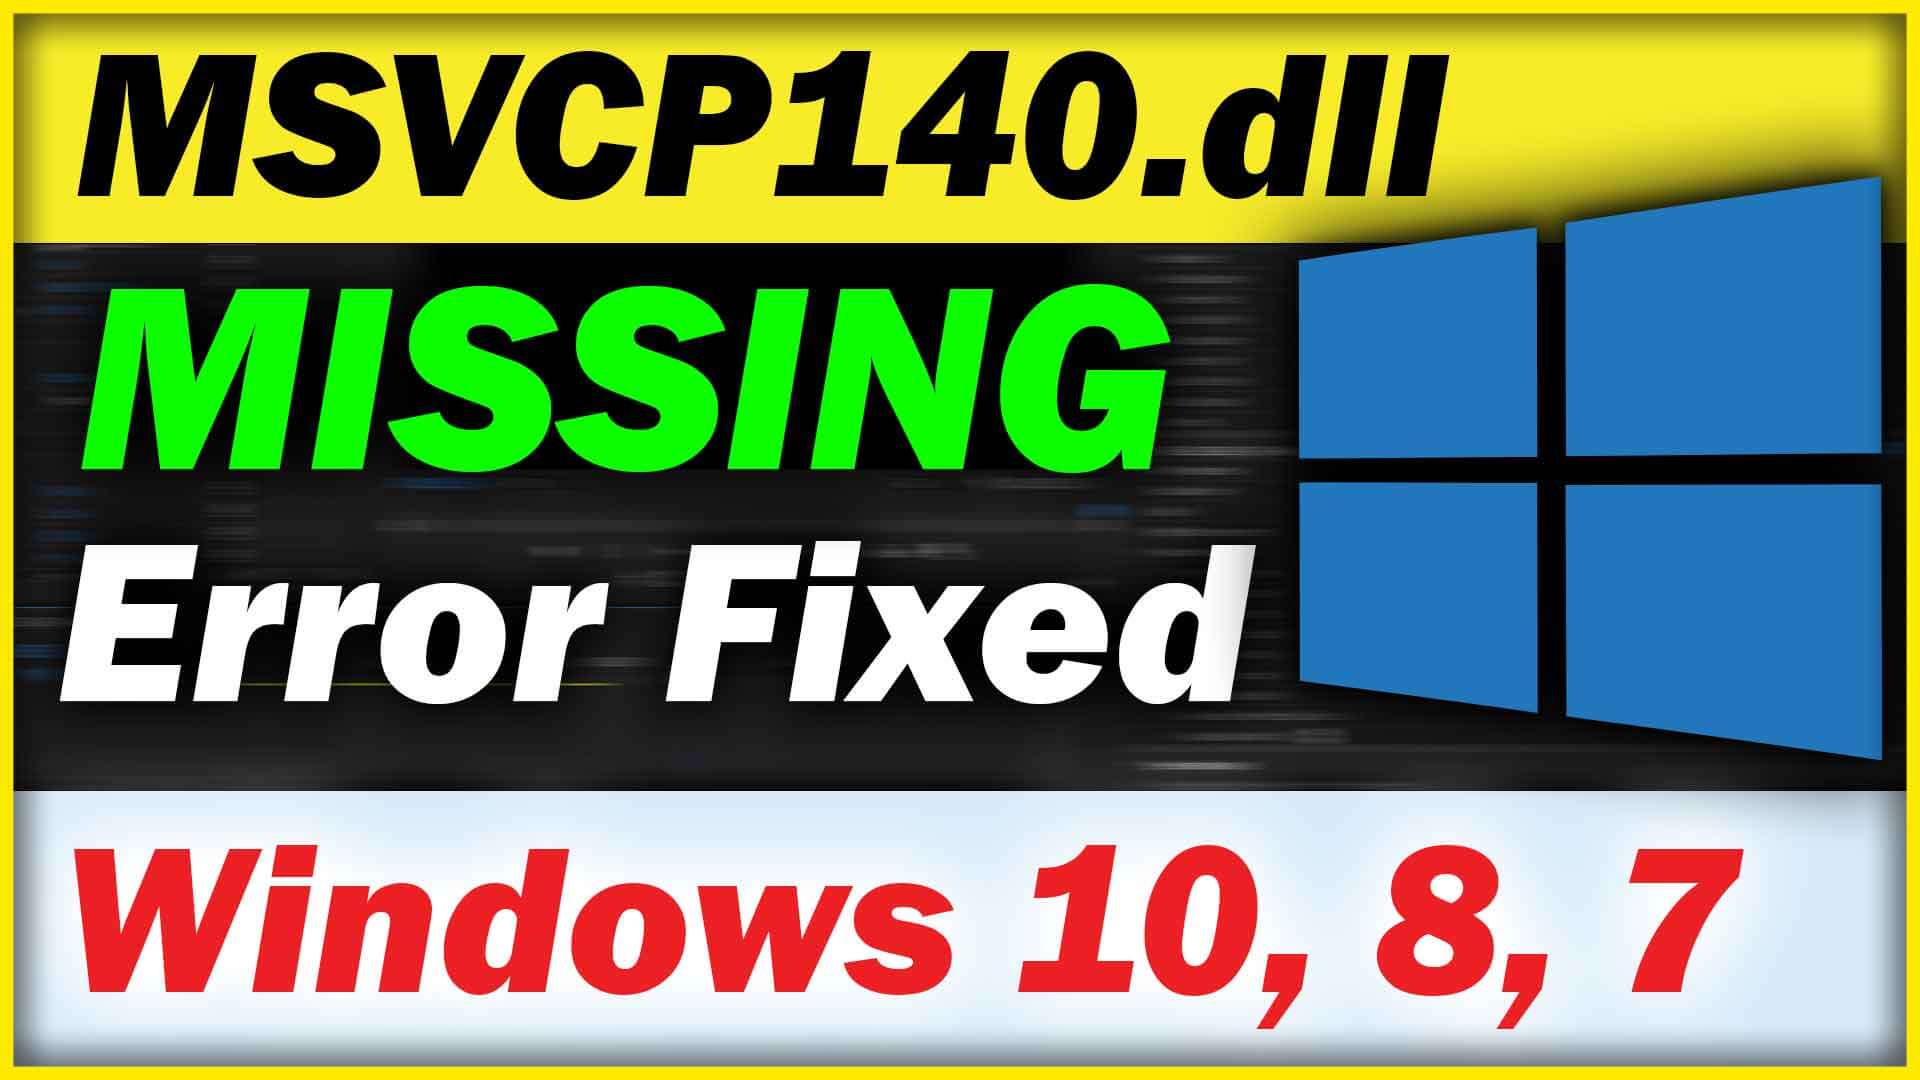 You are currently viewing MSVCP140.dll missing OBS Studio/The Program can’t start because MSVCP140.dll is missing from your computer